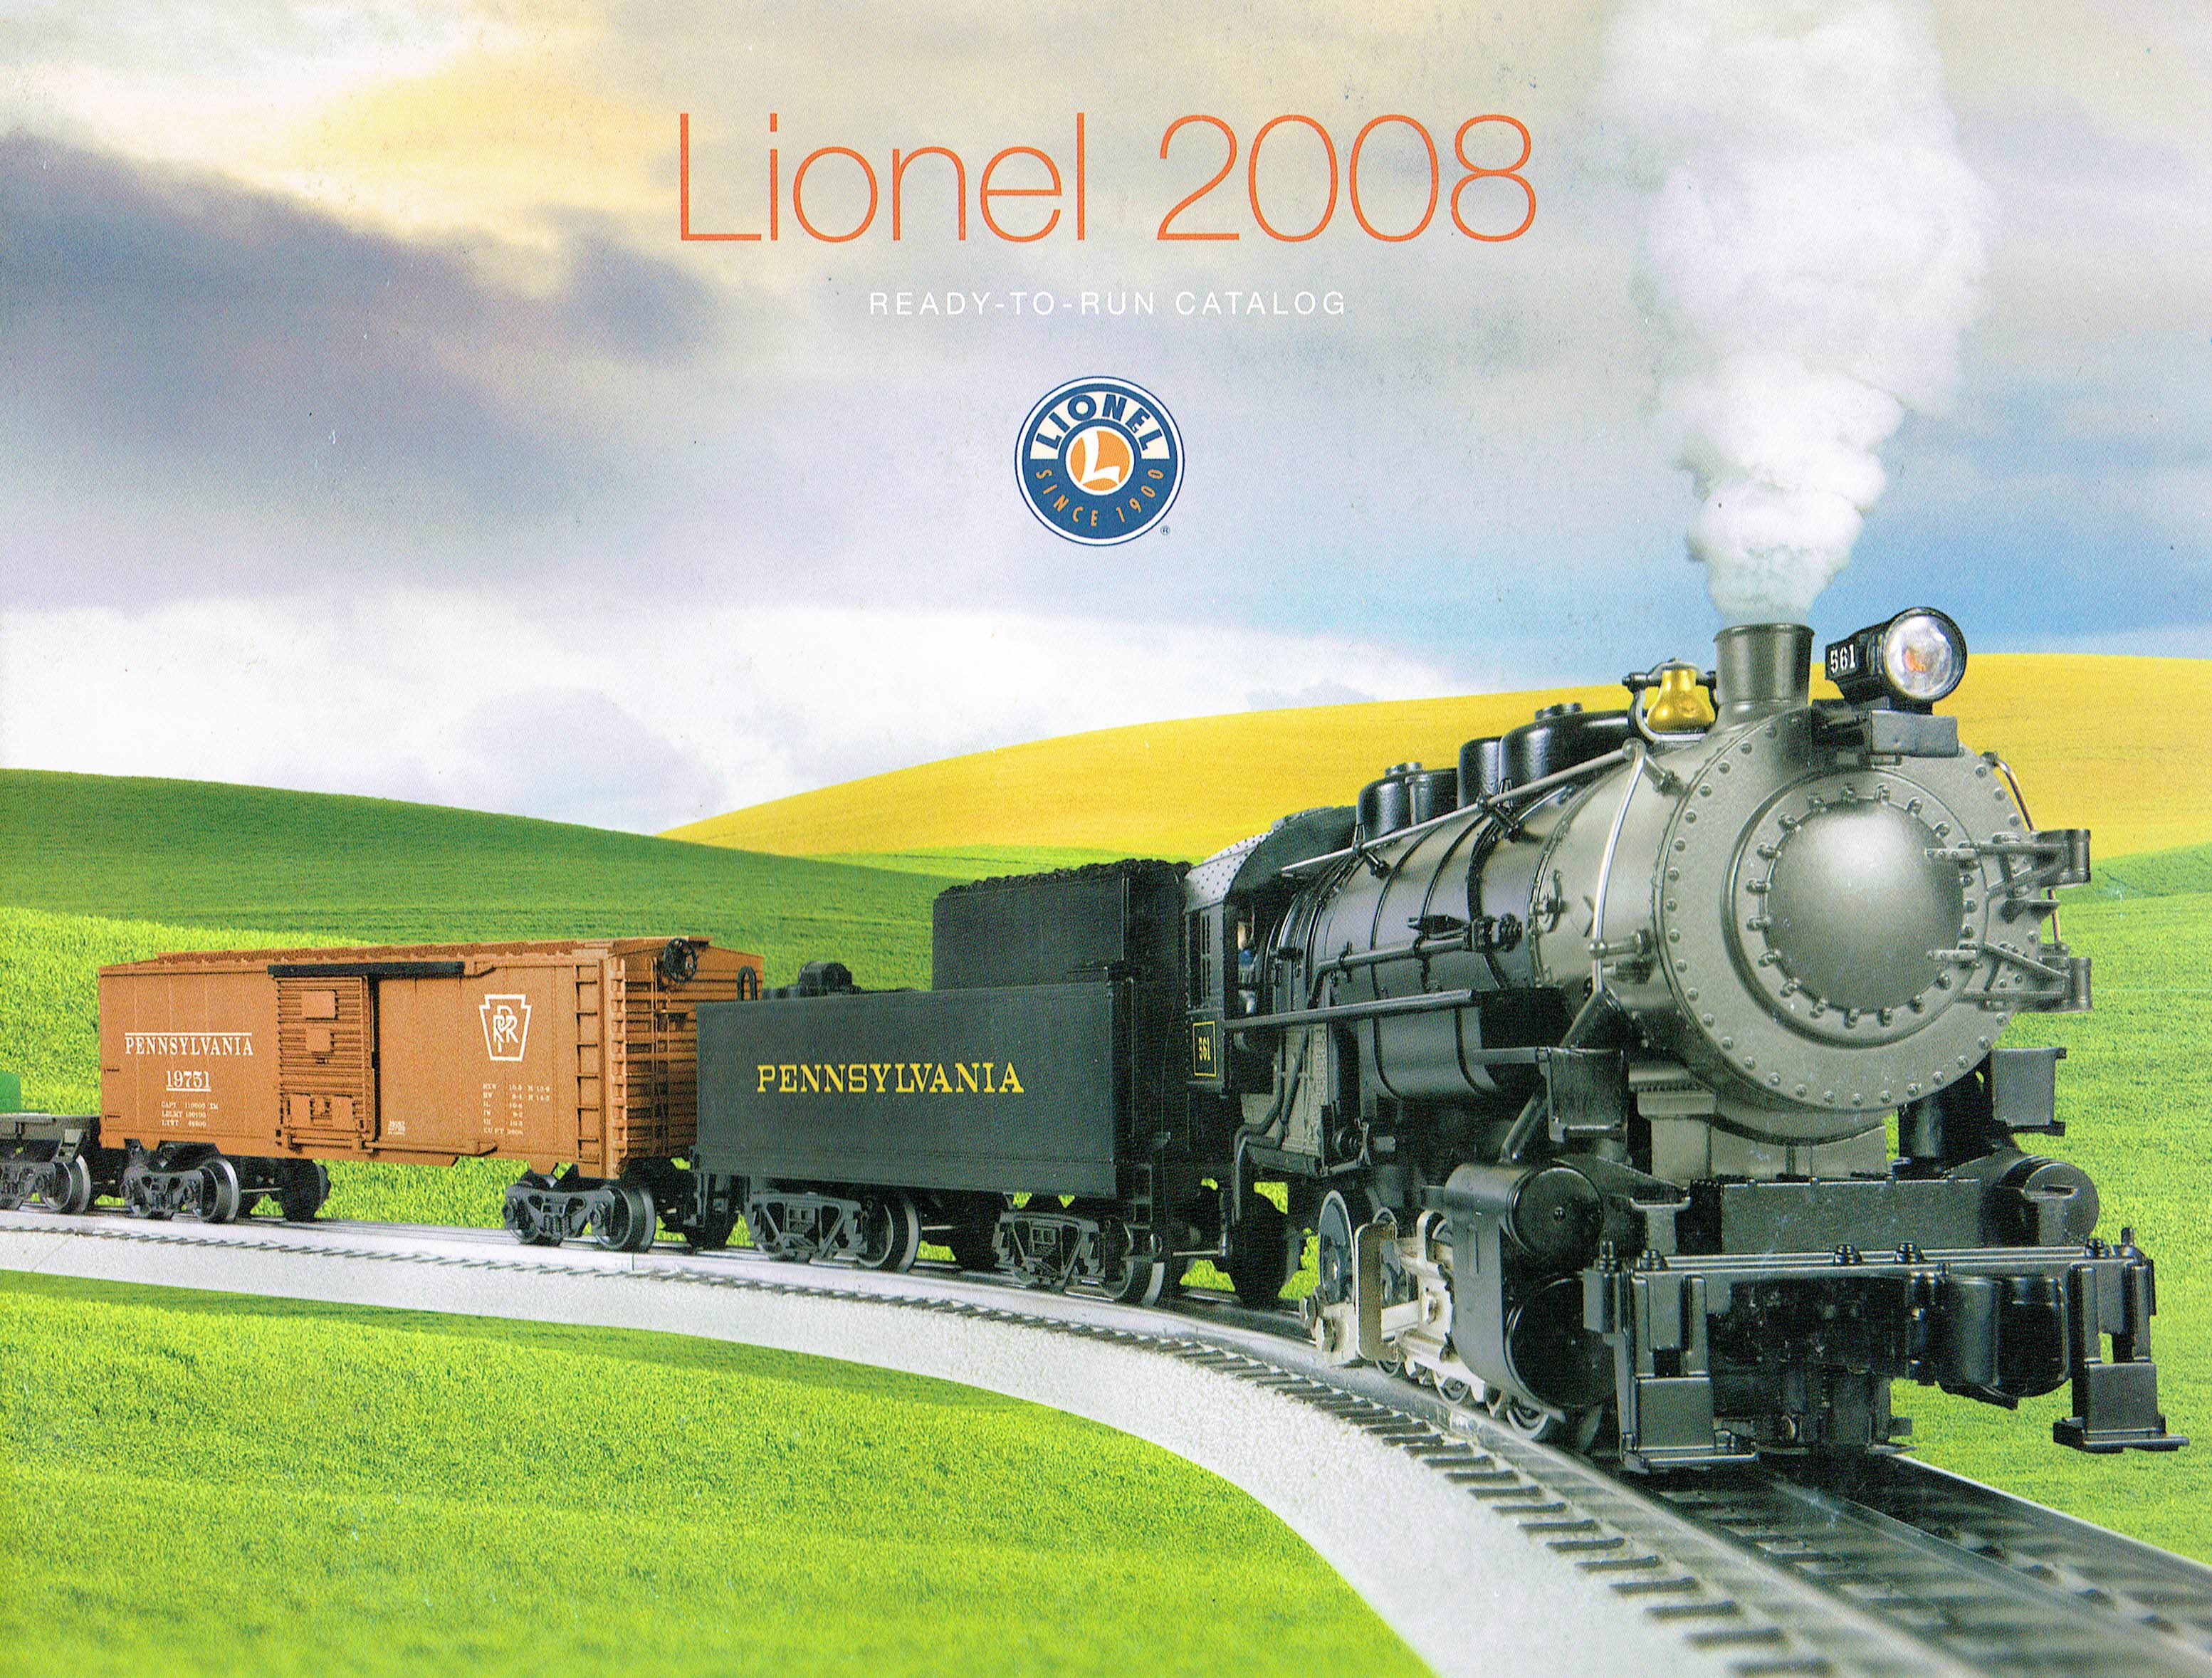 Lionel 2008 Ready-To-Run Catalog image